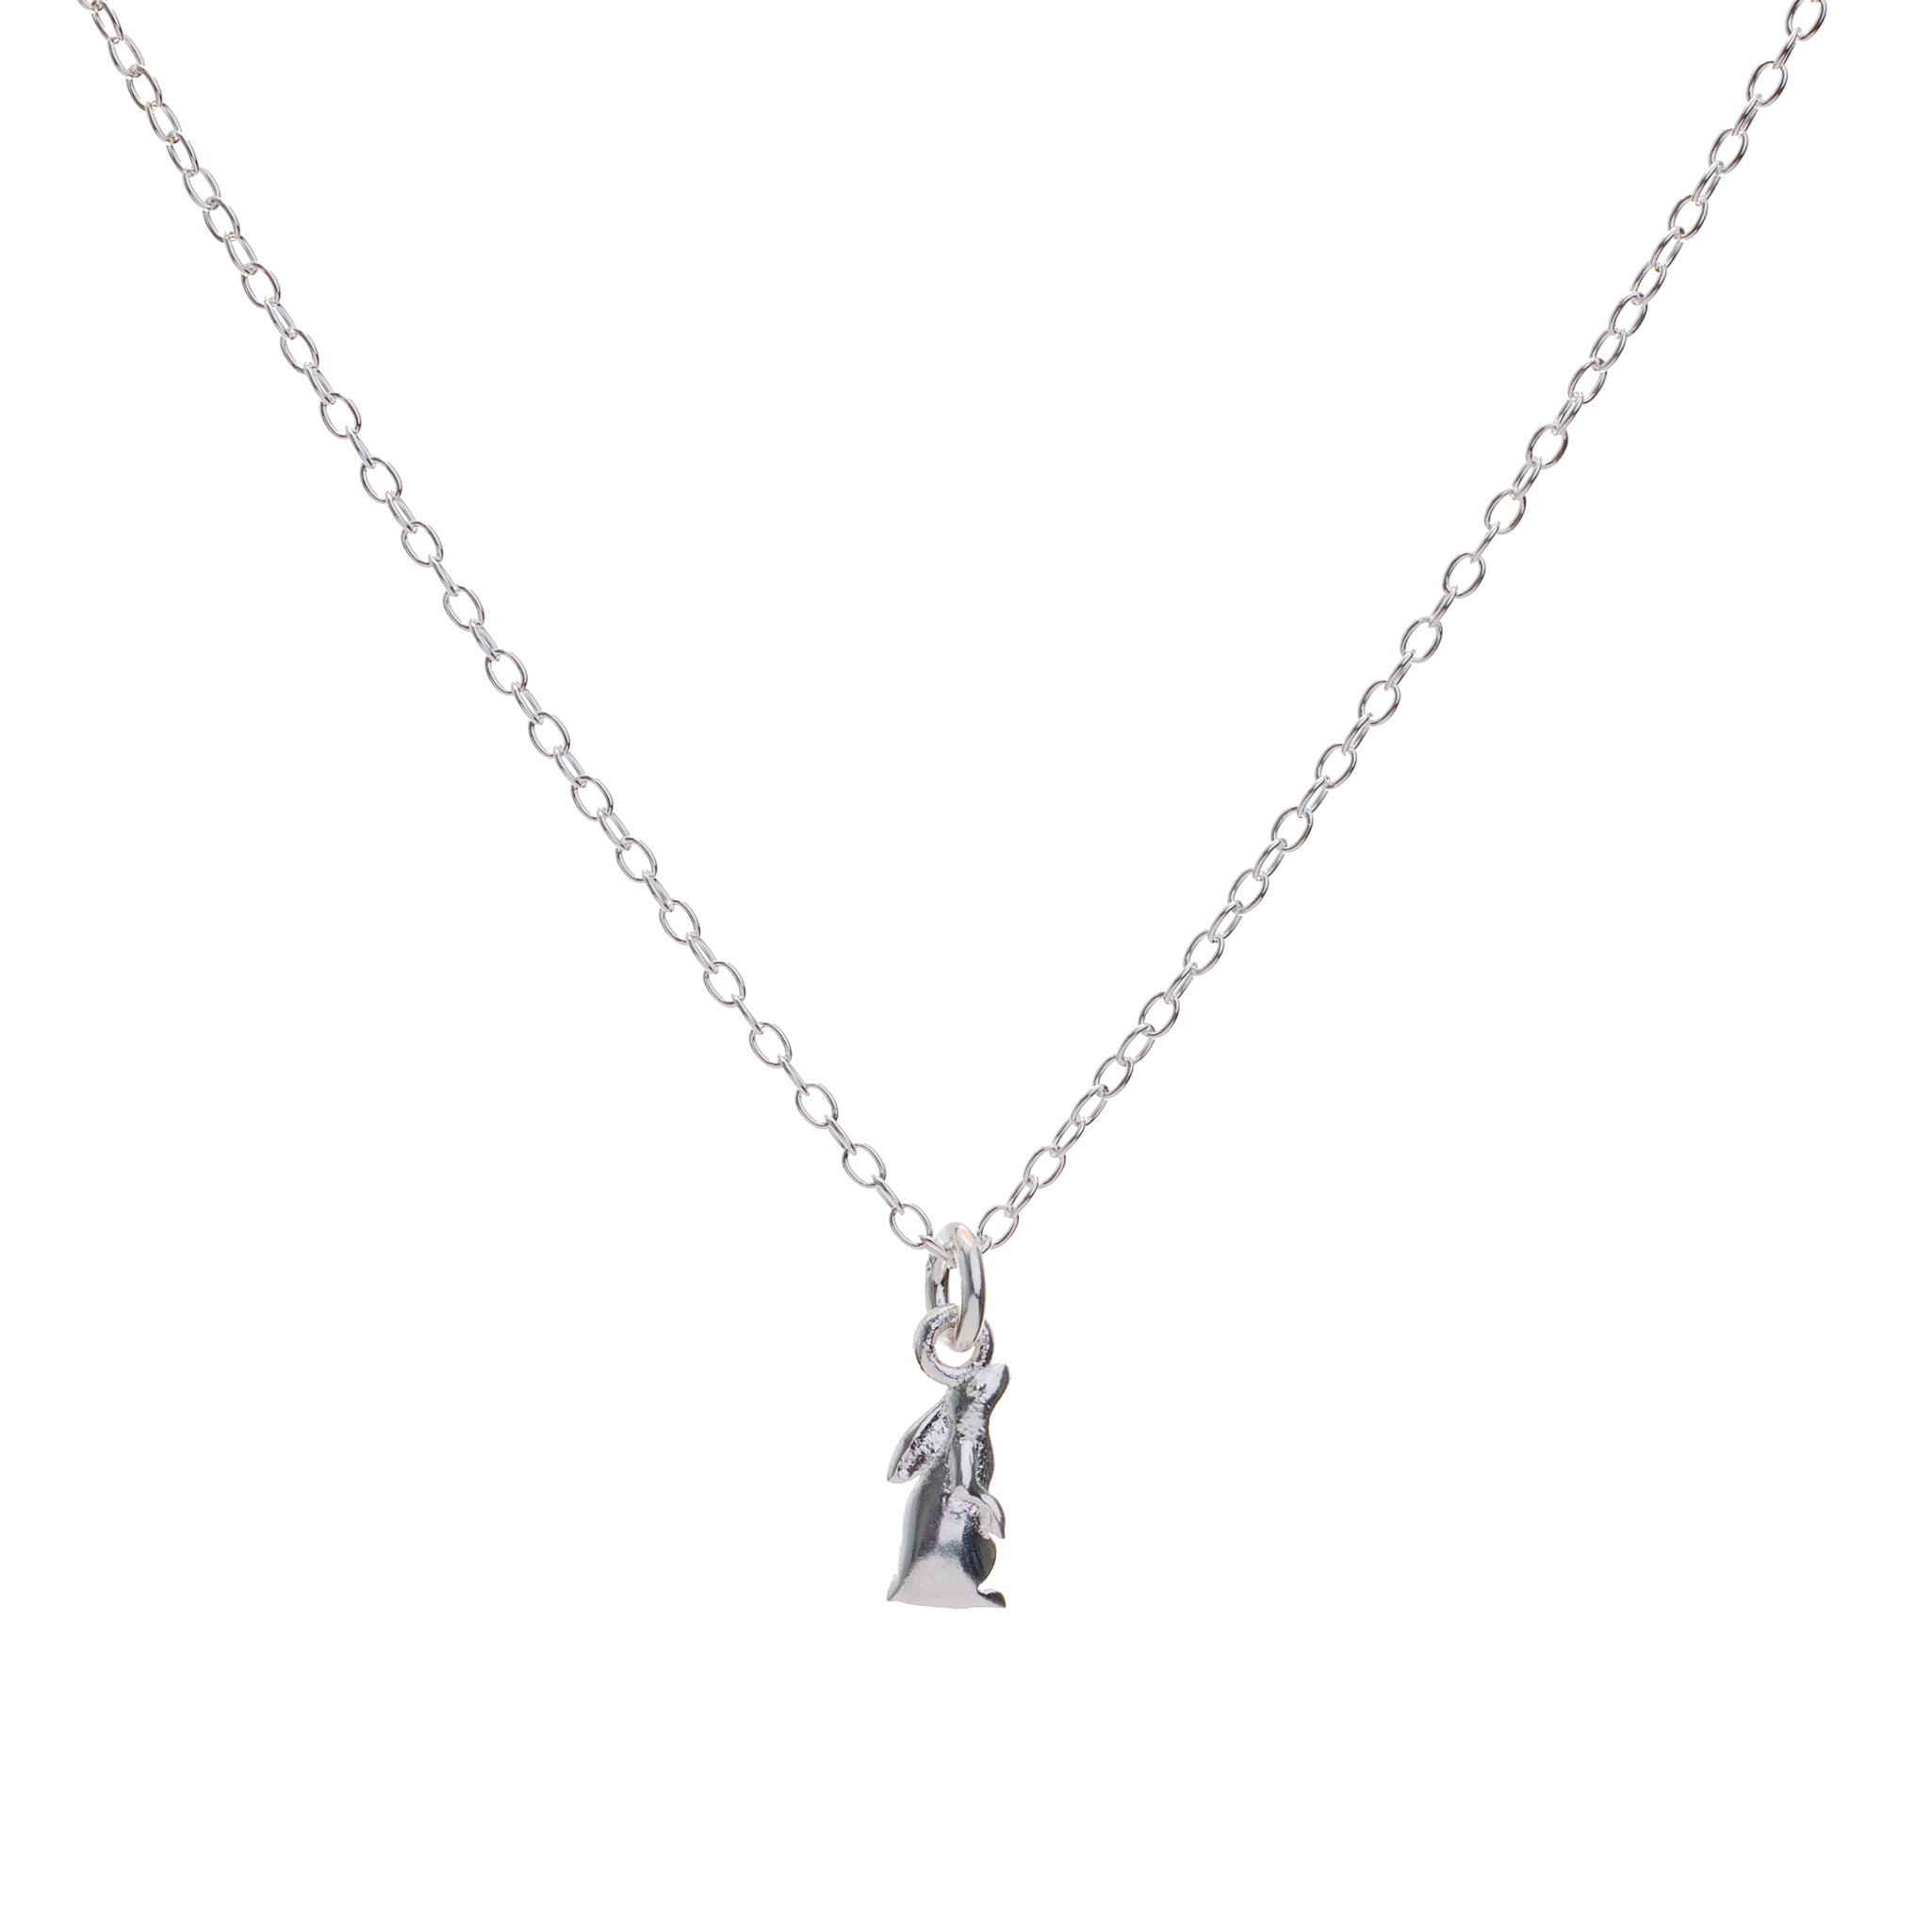 Buy Multilayer Starry Charm Delicate Sterling Silver Necklace by Mannash™  Jewellery